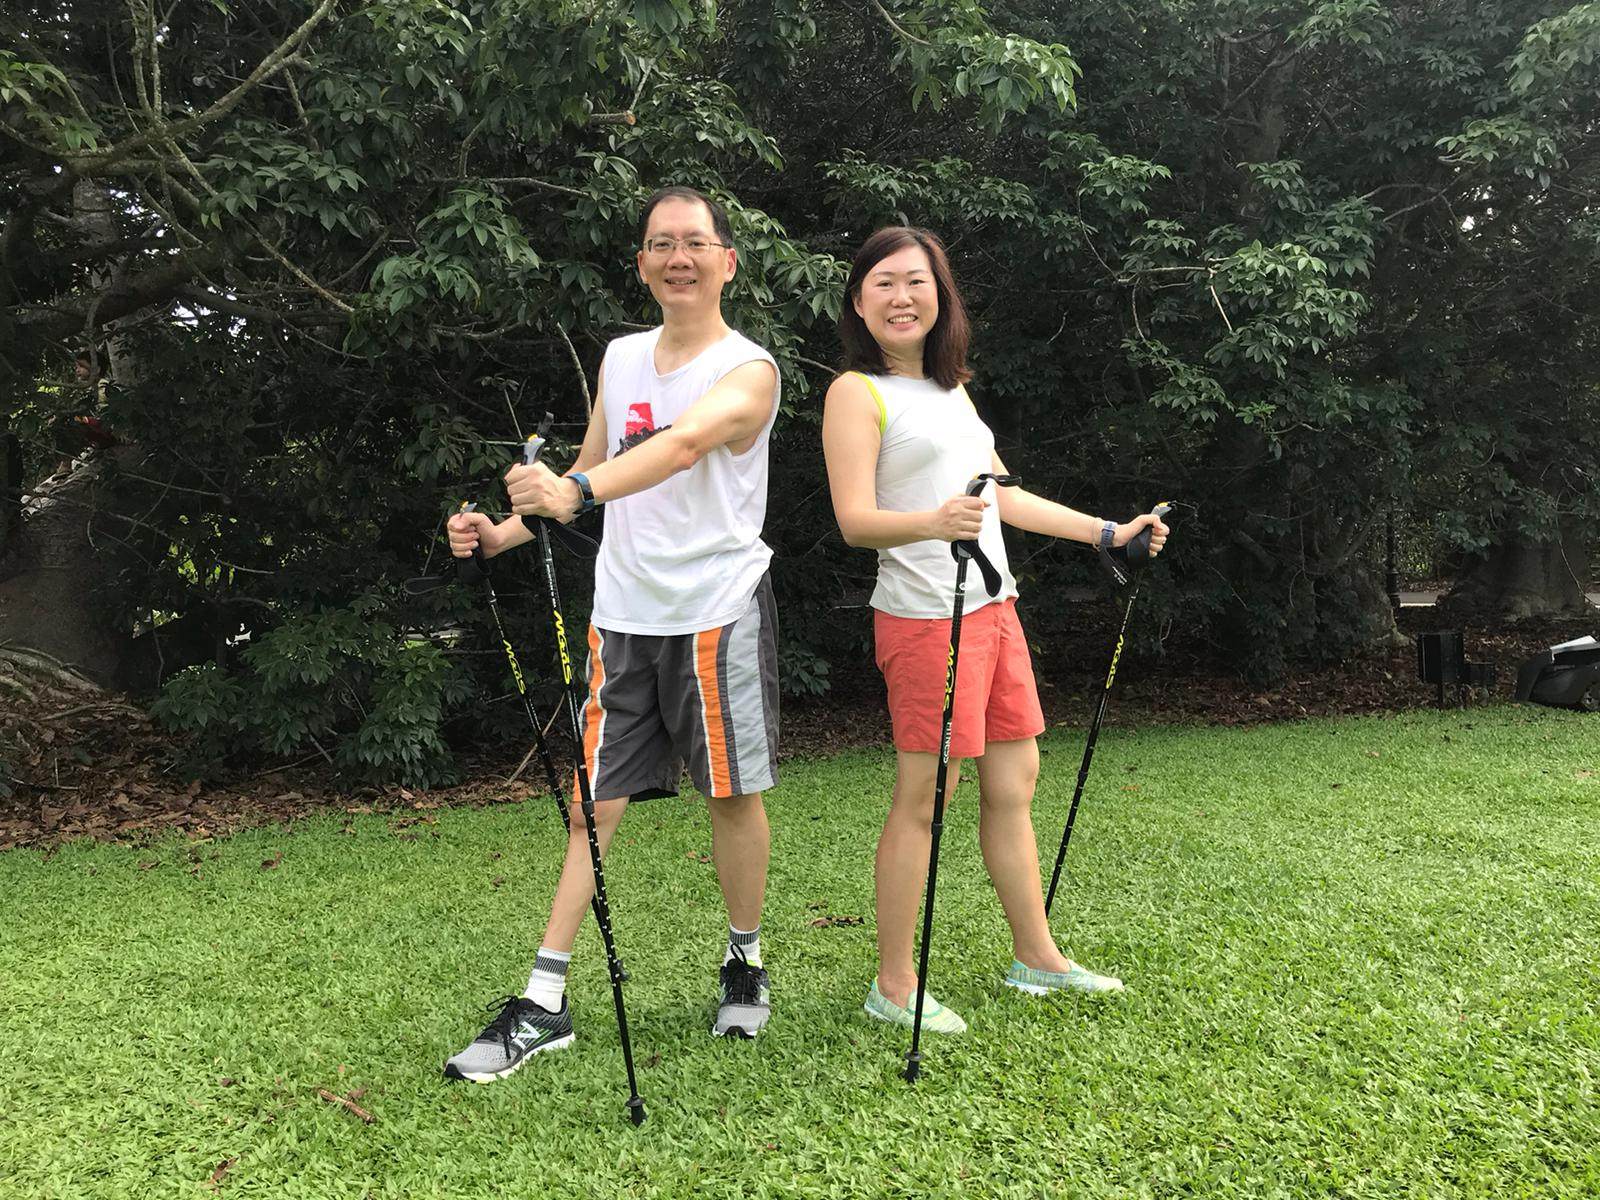 Singapore couple Calvin Kee and Mary Yap took up Nordic walking in 2019 and  say it has improved their health. Photo: Calvin Kee and Mary Yap